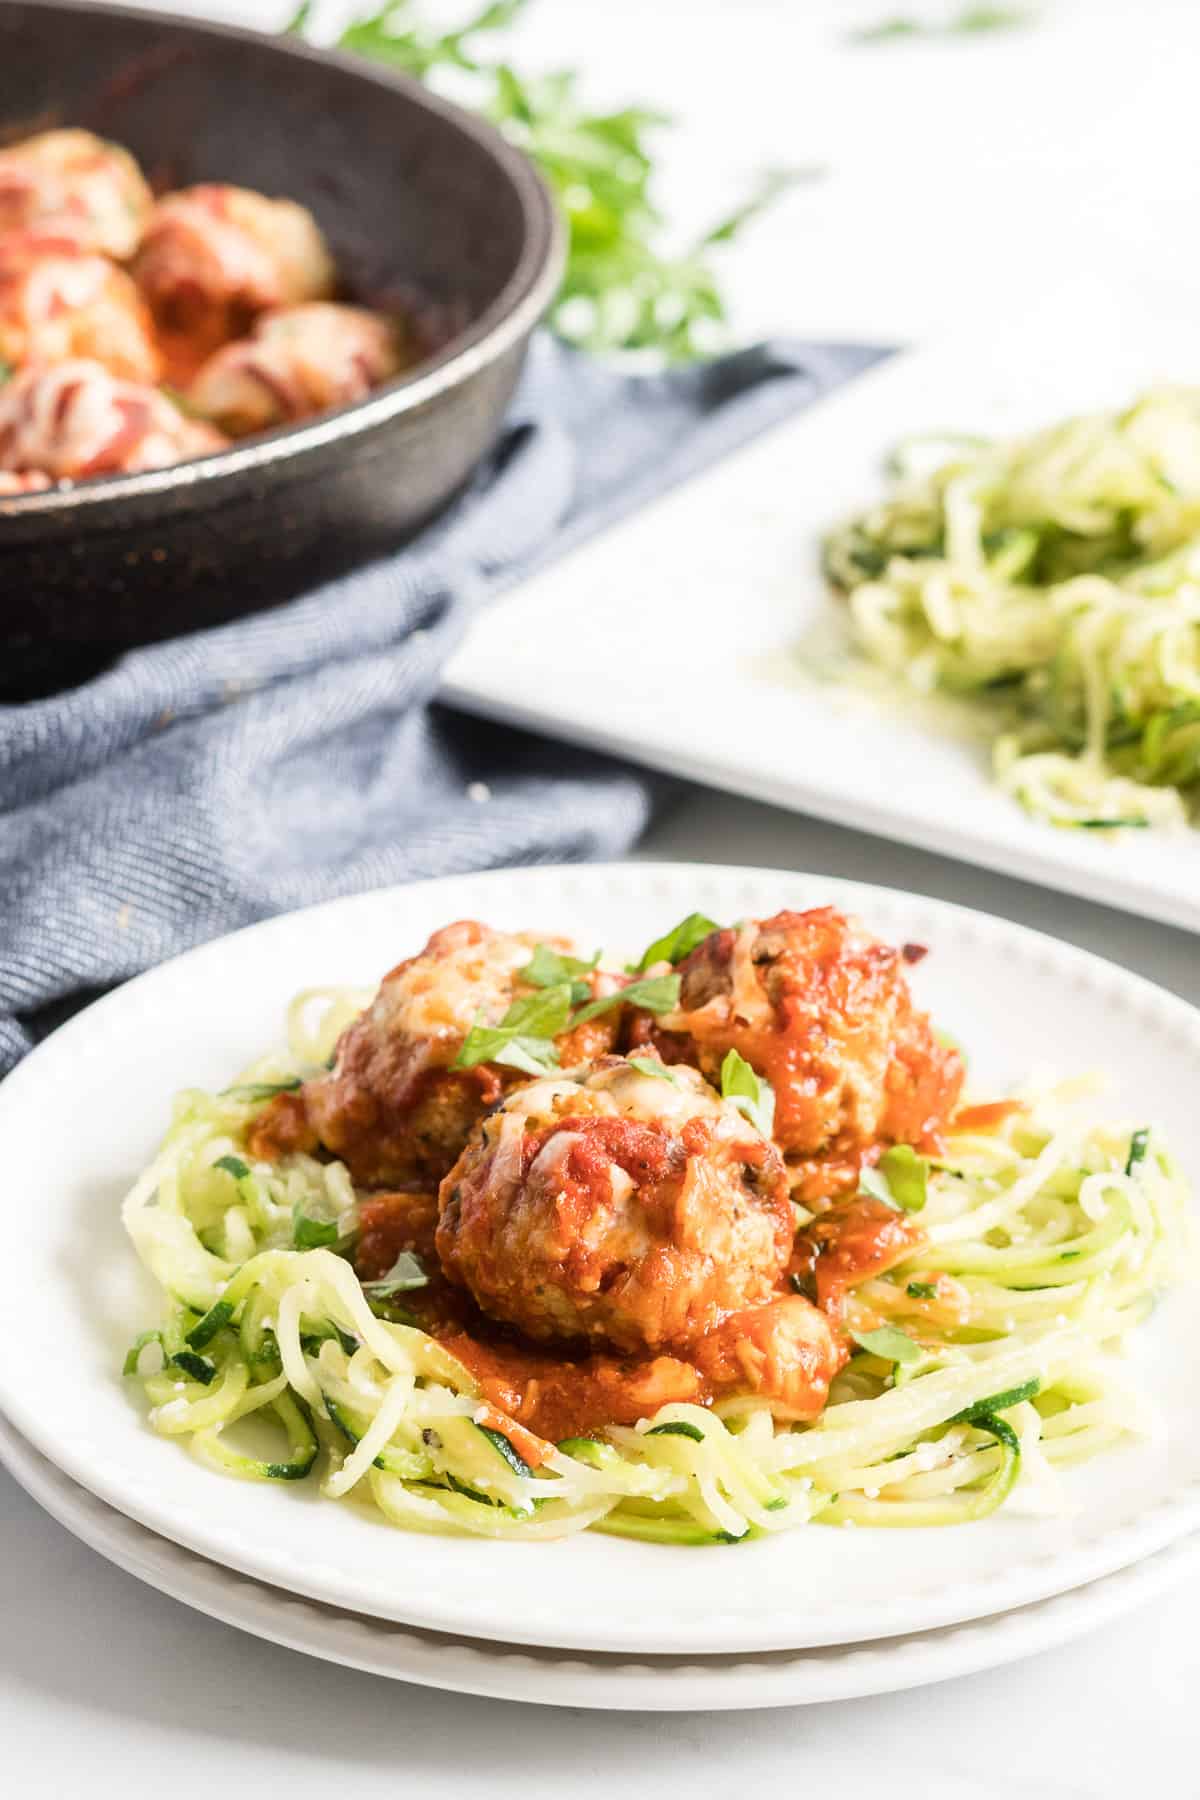 Three turkey meatballs on top of zucchini noodles on a white plate.